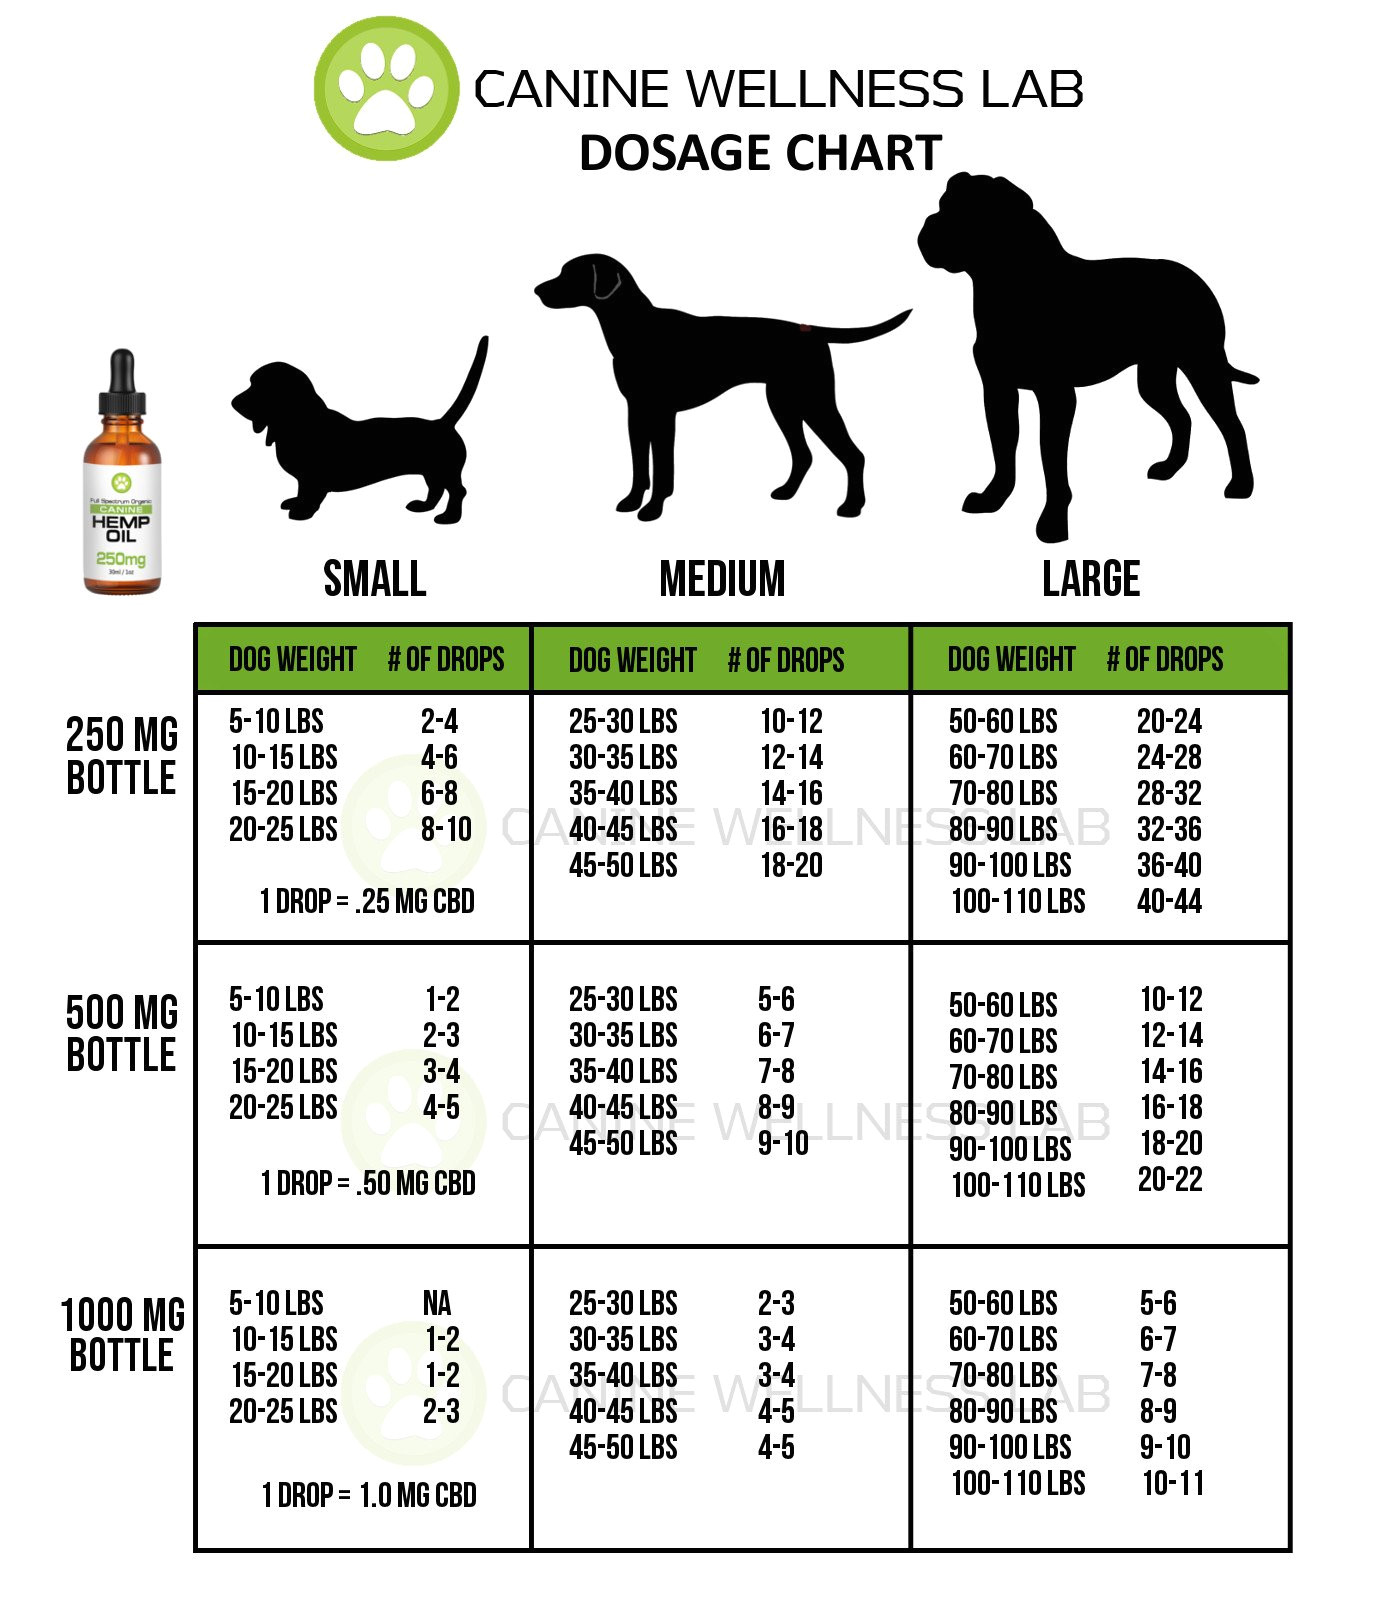 the general recommended dosage is about 1mg of full spectrum hemp oil extract per 10 pounds of dog weight adjust up or down depending on results